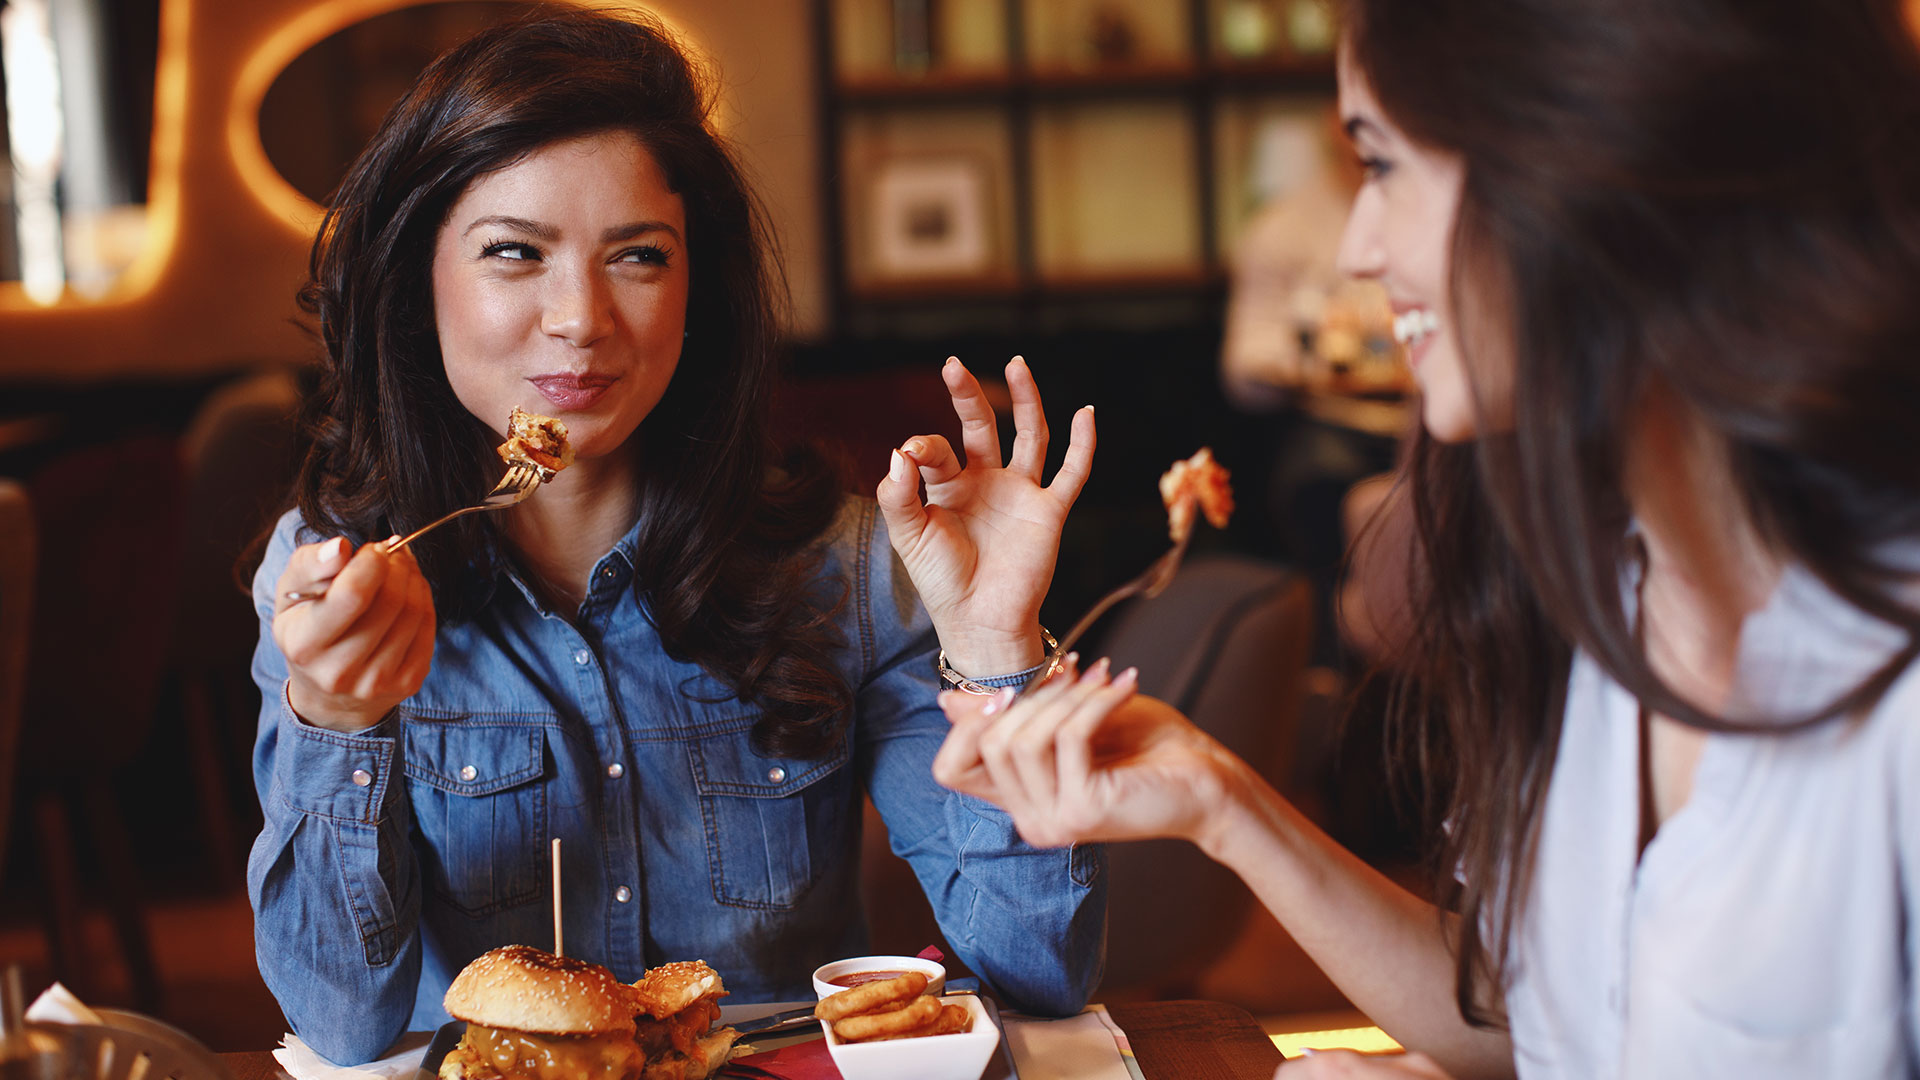 Two woman sharing a meal at a restaurant. The woman on the right is facing the camera holding up another bite to her mouth with one hand and gesturing that the food is good with her other. The woman on the left is also about to take another bite.